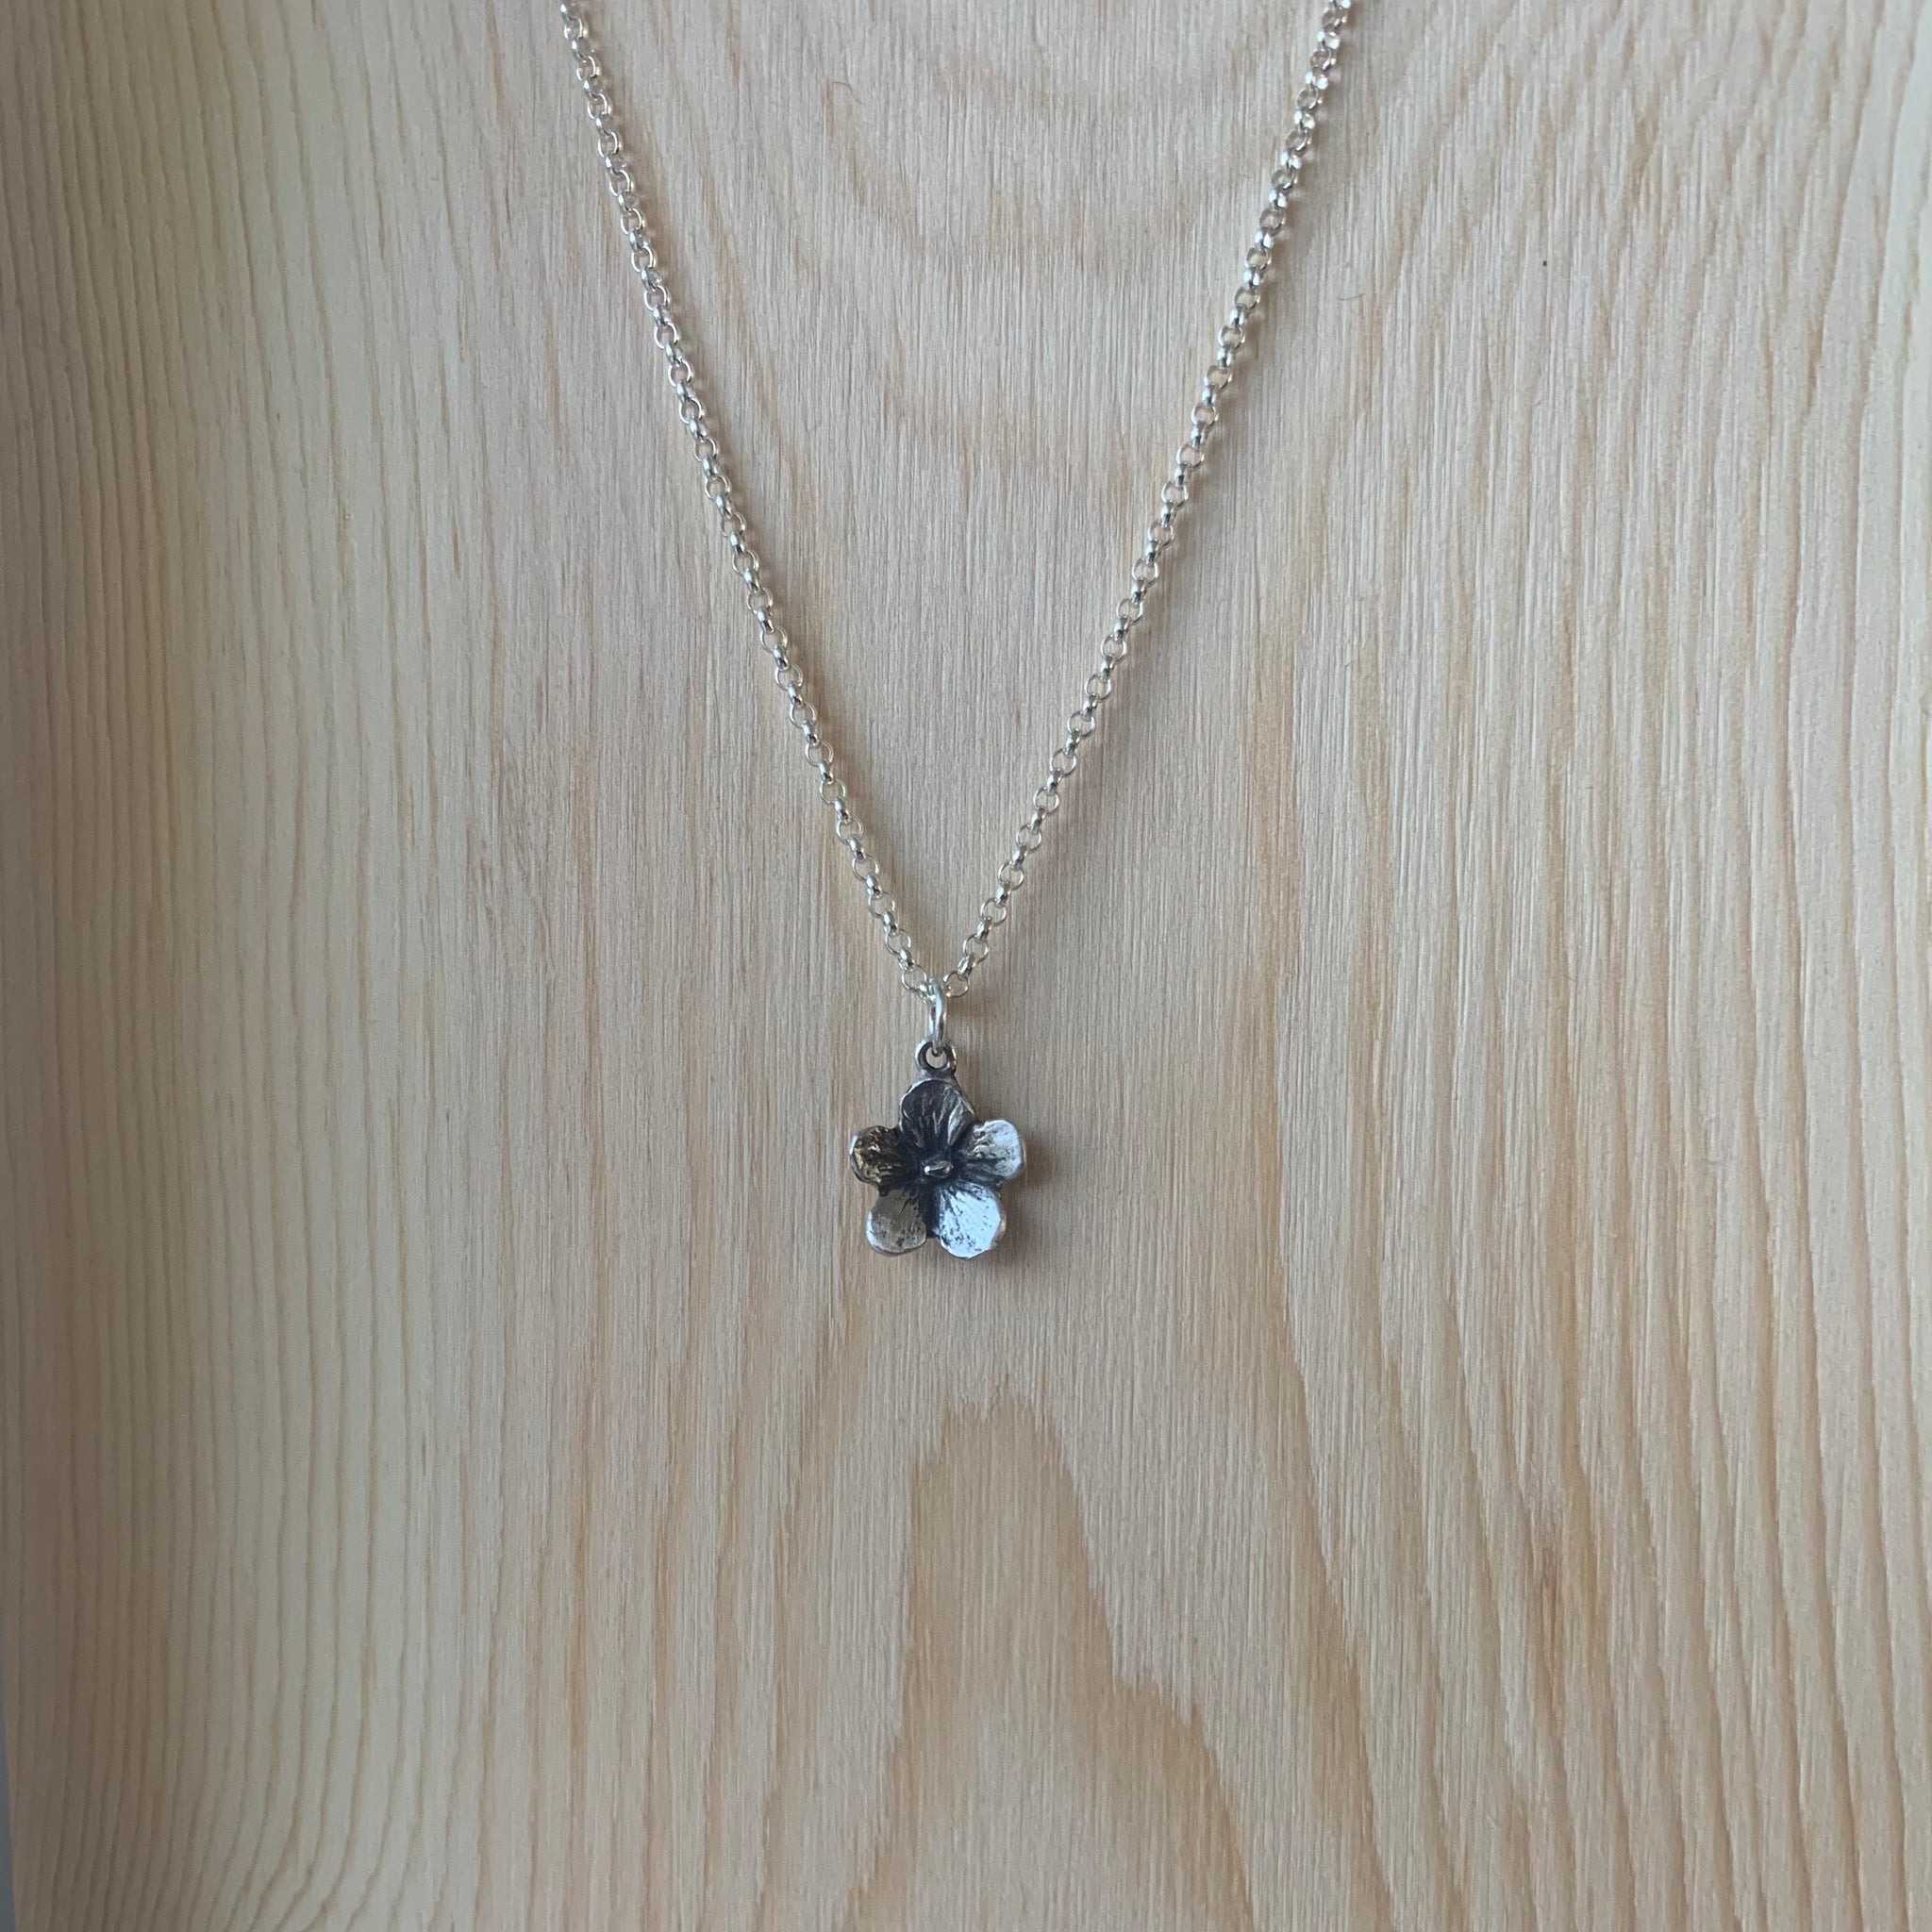 Unmarked Industries Forget me not Necklace